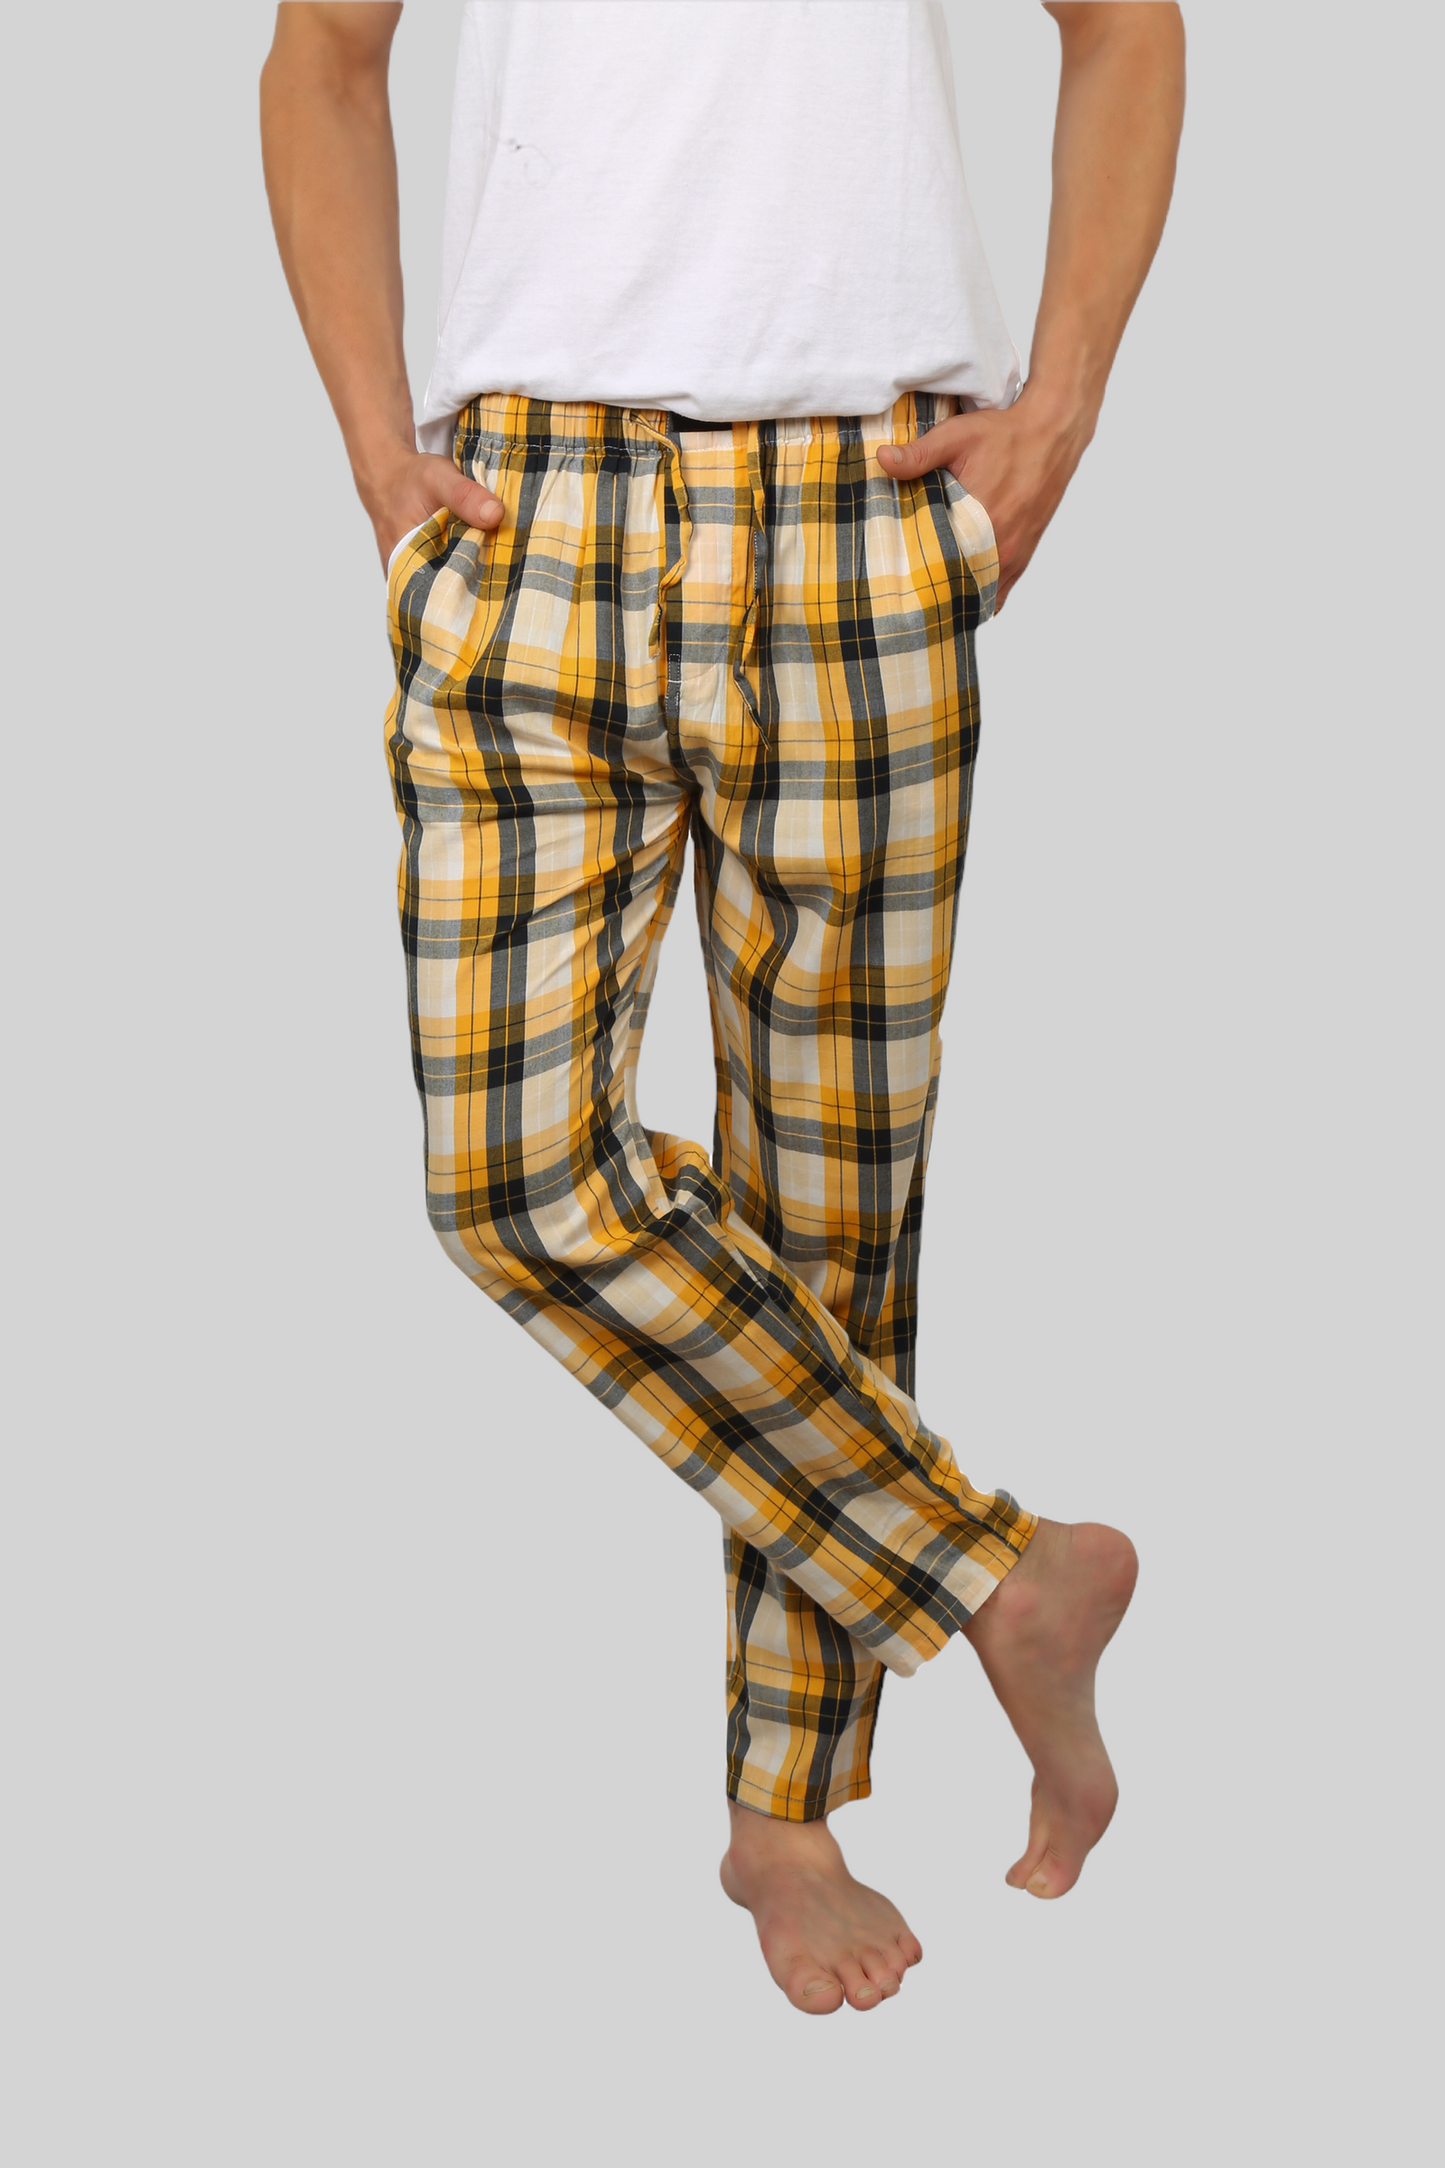 Yellow soft and super comfortable checkered pajamas for men